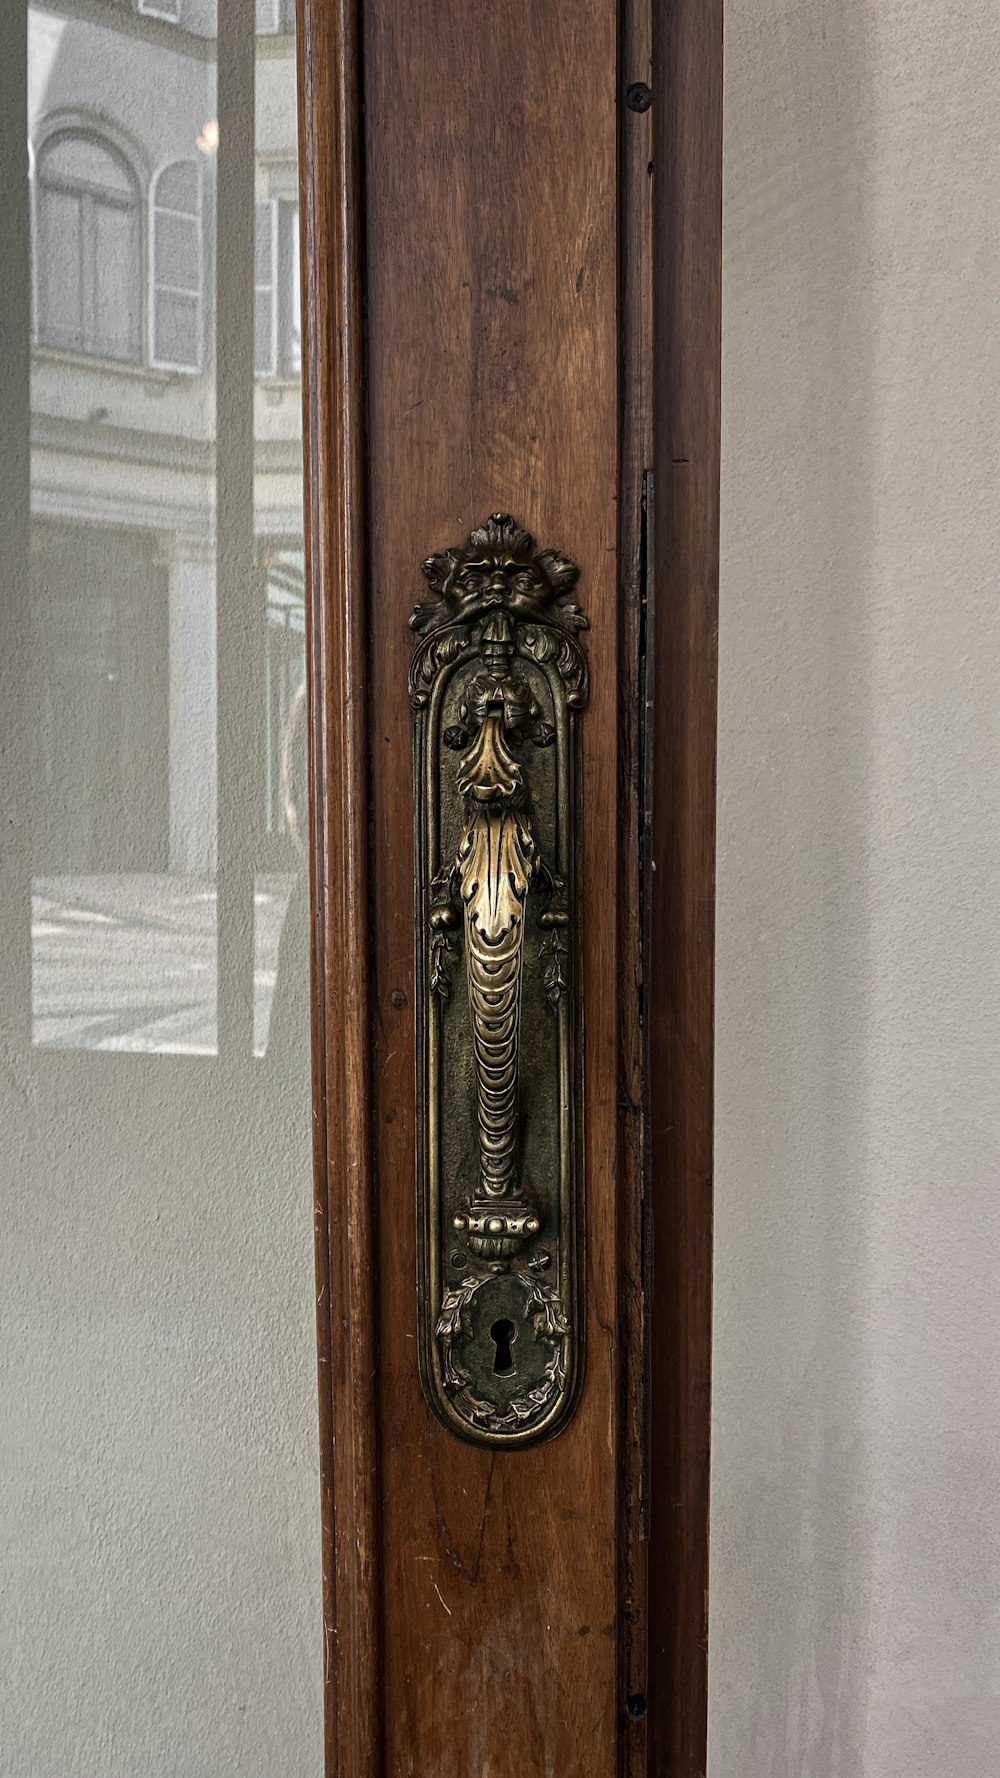 a wooden door with a metal handle on it